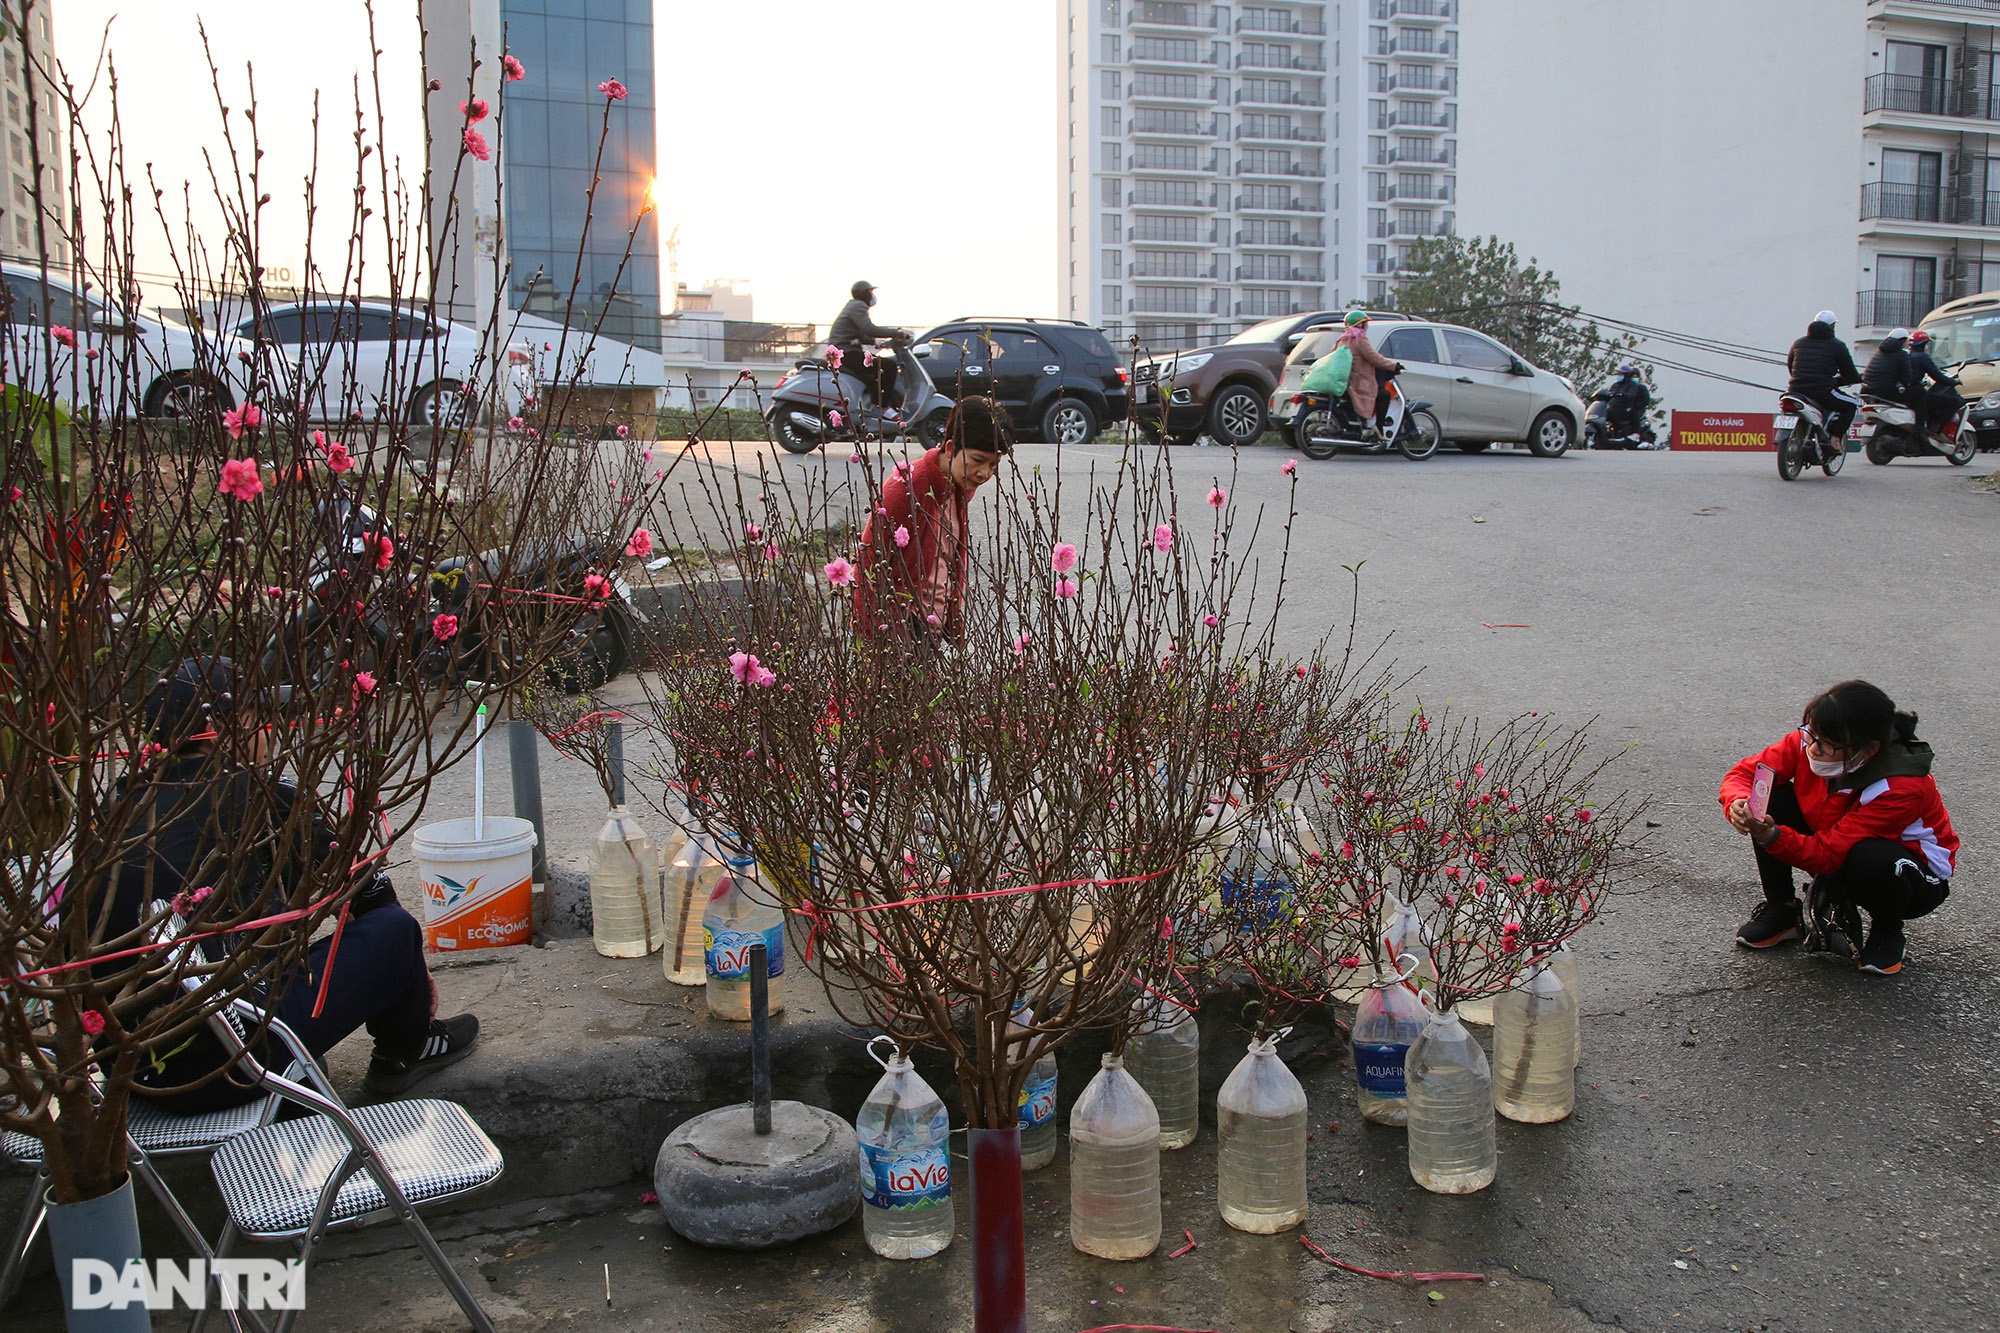 Early peach blossoms on Hanoi streets